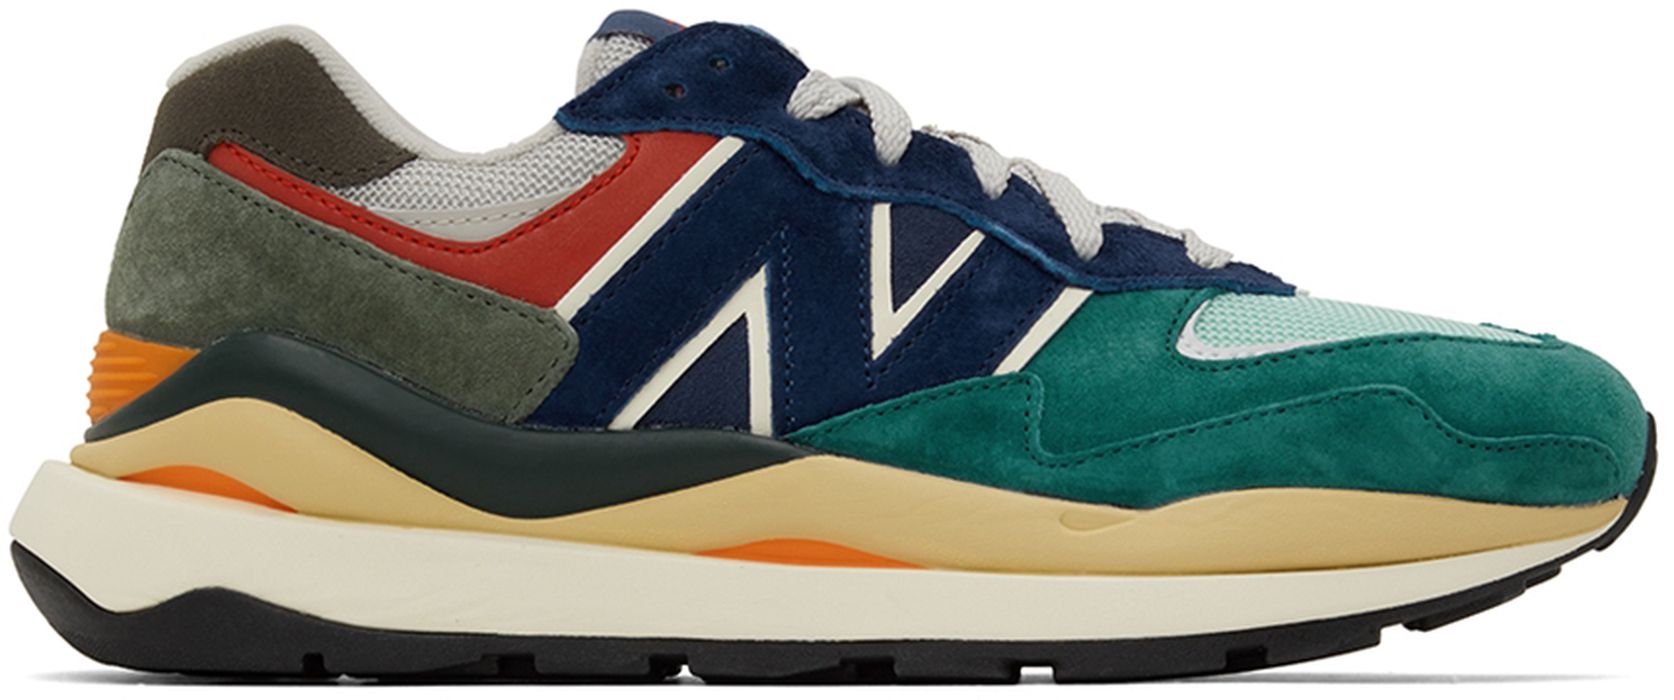 New Balance Multicolor 57/40 Sneakers